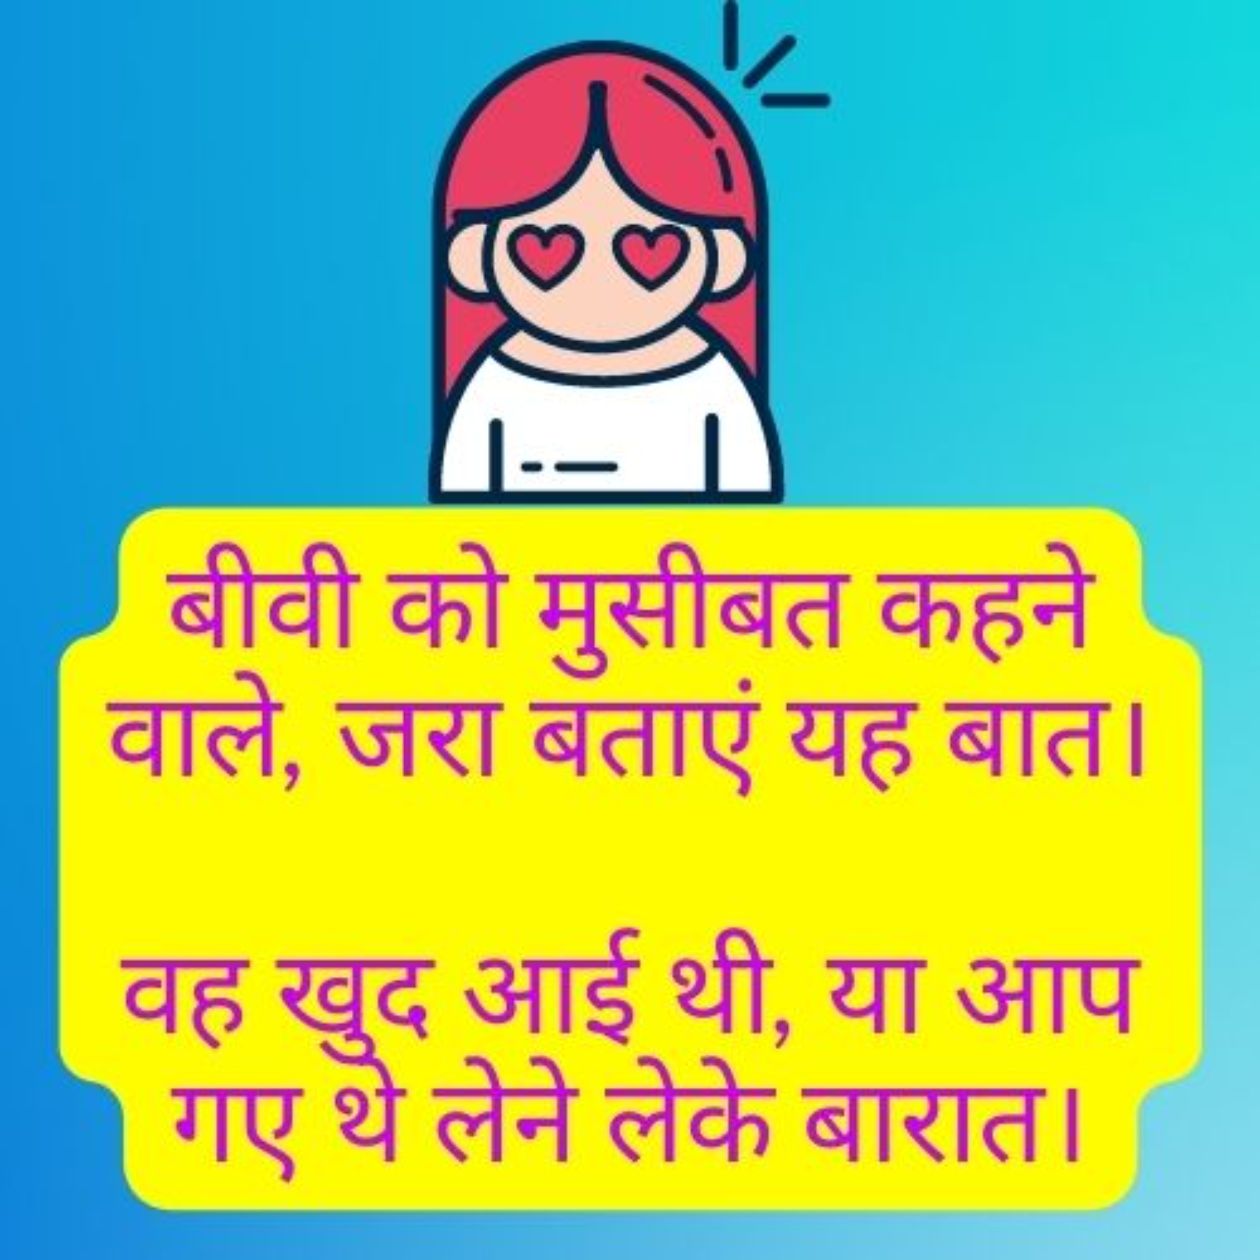 A woman animation and funny text in Hindi about the people who disrespect their wife.